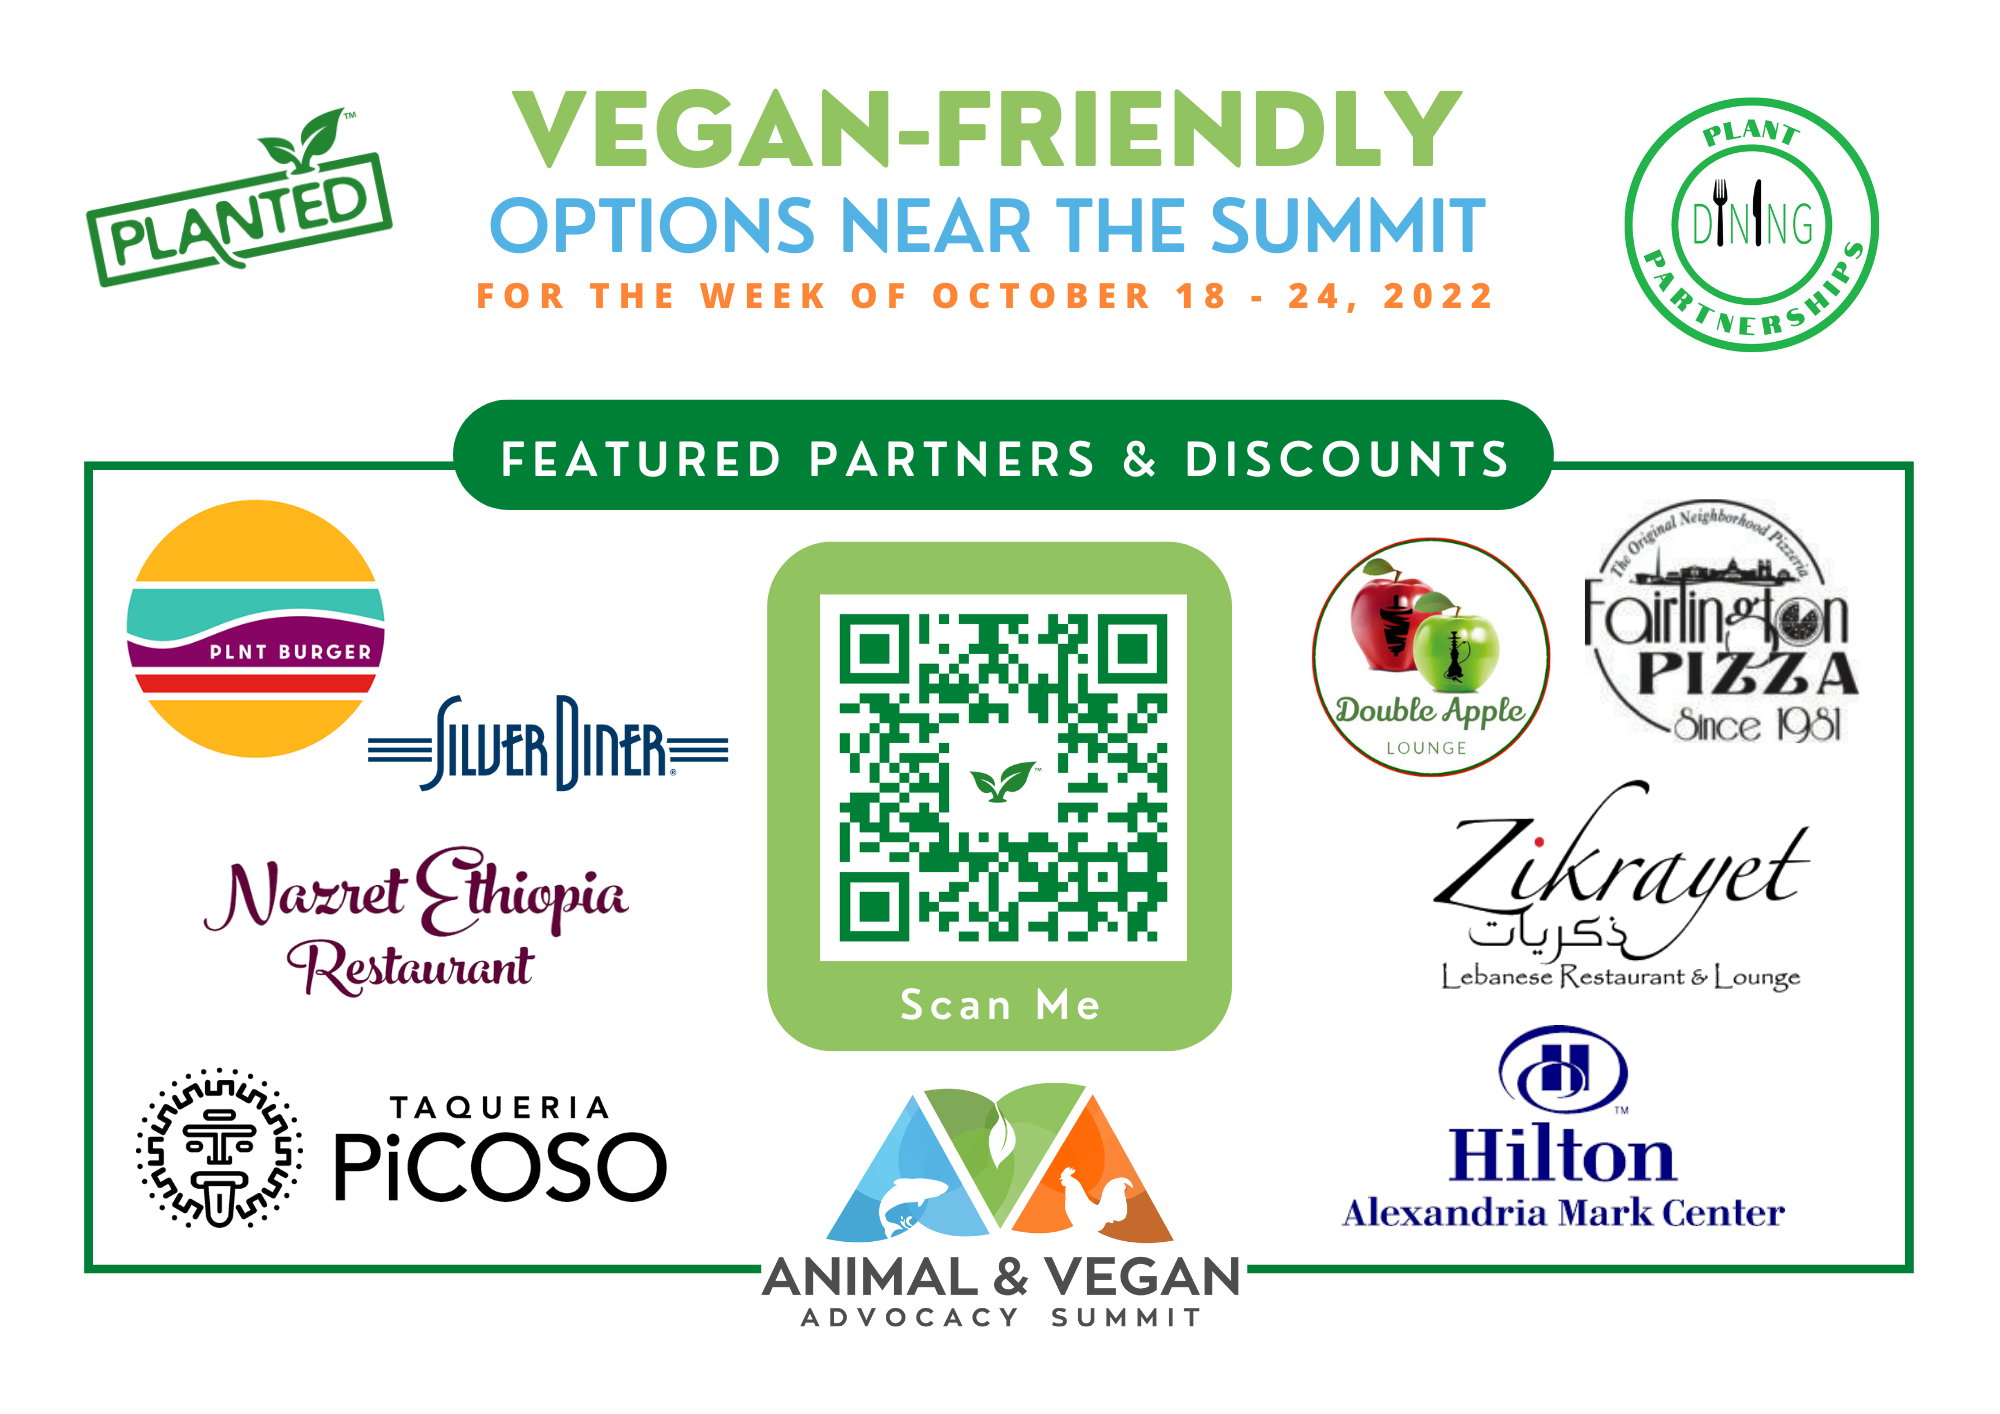 Planted Society and Plant Dining Partnerships are partnering with several restaurants near the conference including PLNT Burger, Silver Diner, Nazret Ethiopian, Taqueria Picoso, Double Apple Lounge, Fairlington Pizza, and Zikrayat Lebanese. The AVA Summit has partnered with the Hilton Mark Center as well!